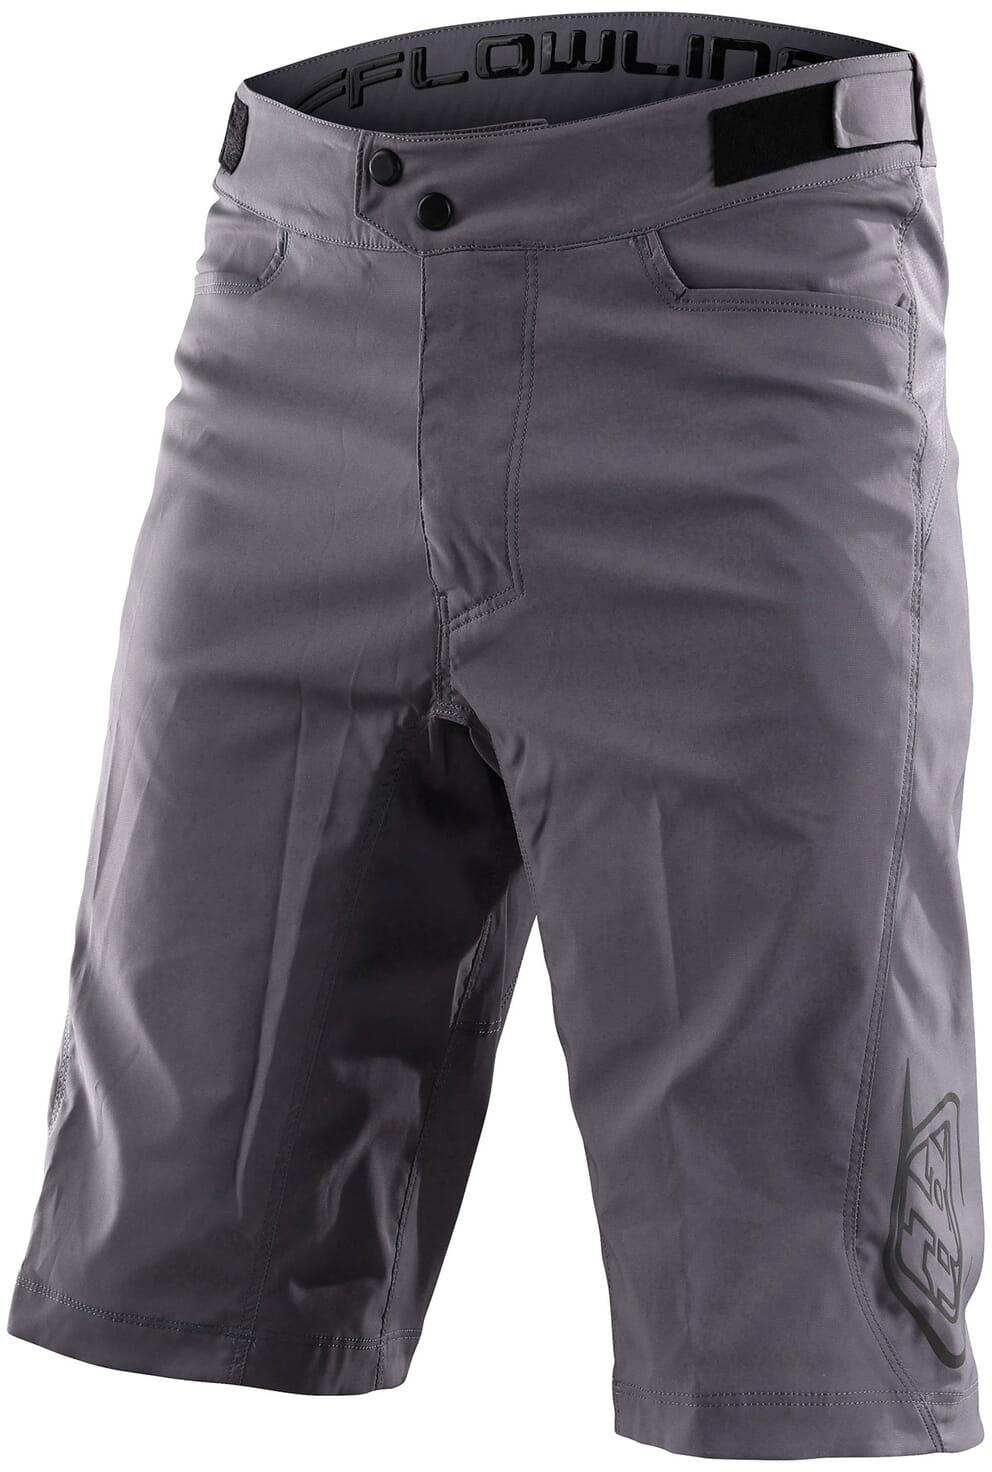 Troy Lee Designs Flowline Shorts  Solid Charcoal